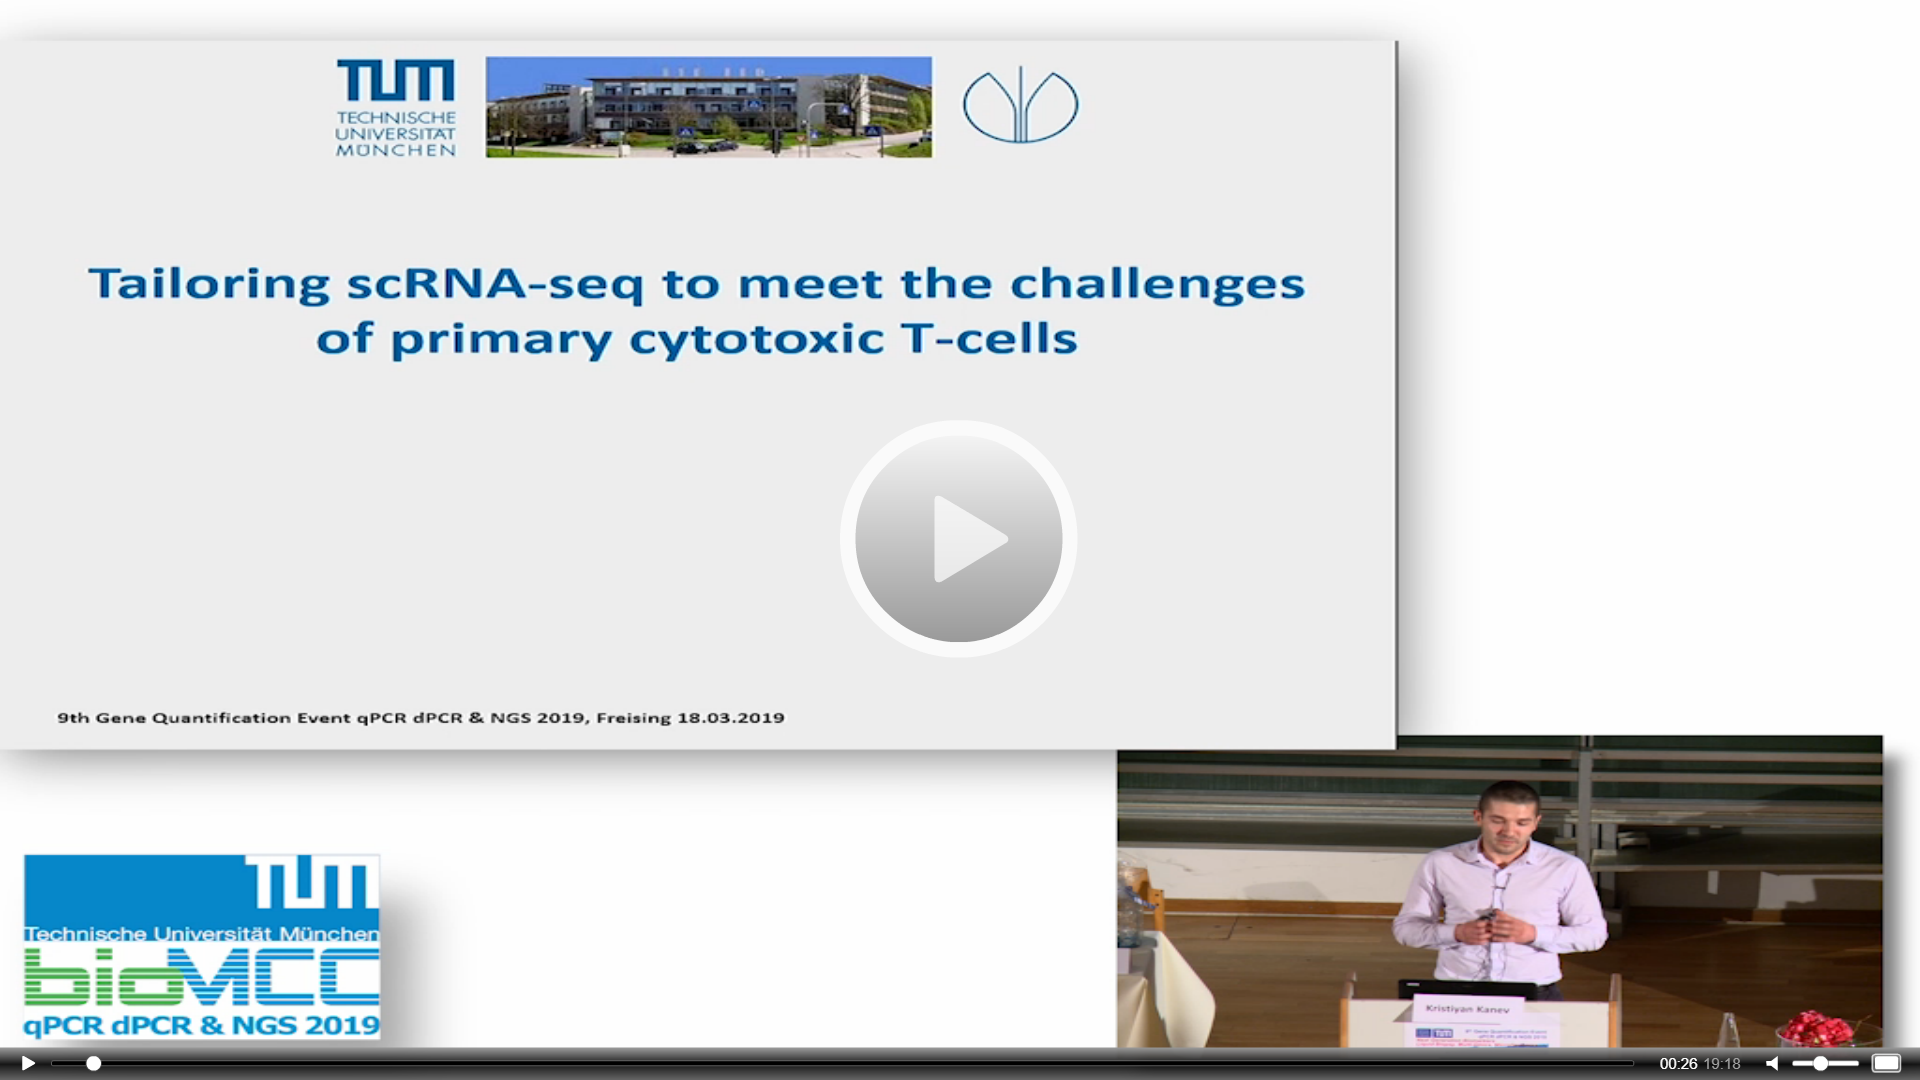 Tailoring scRNA-seq to Meet the Challenges of Primary Cytotoxic T-cells